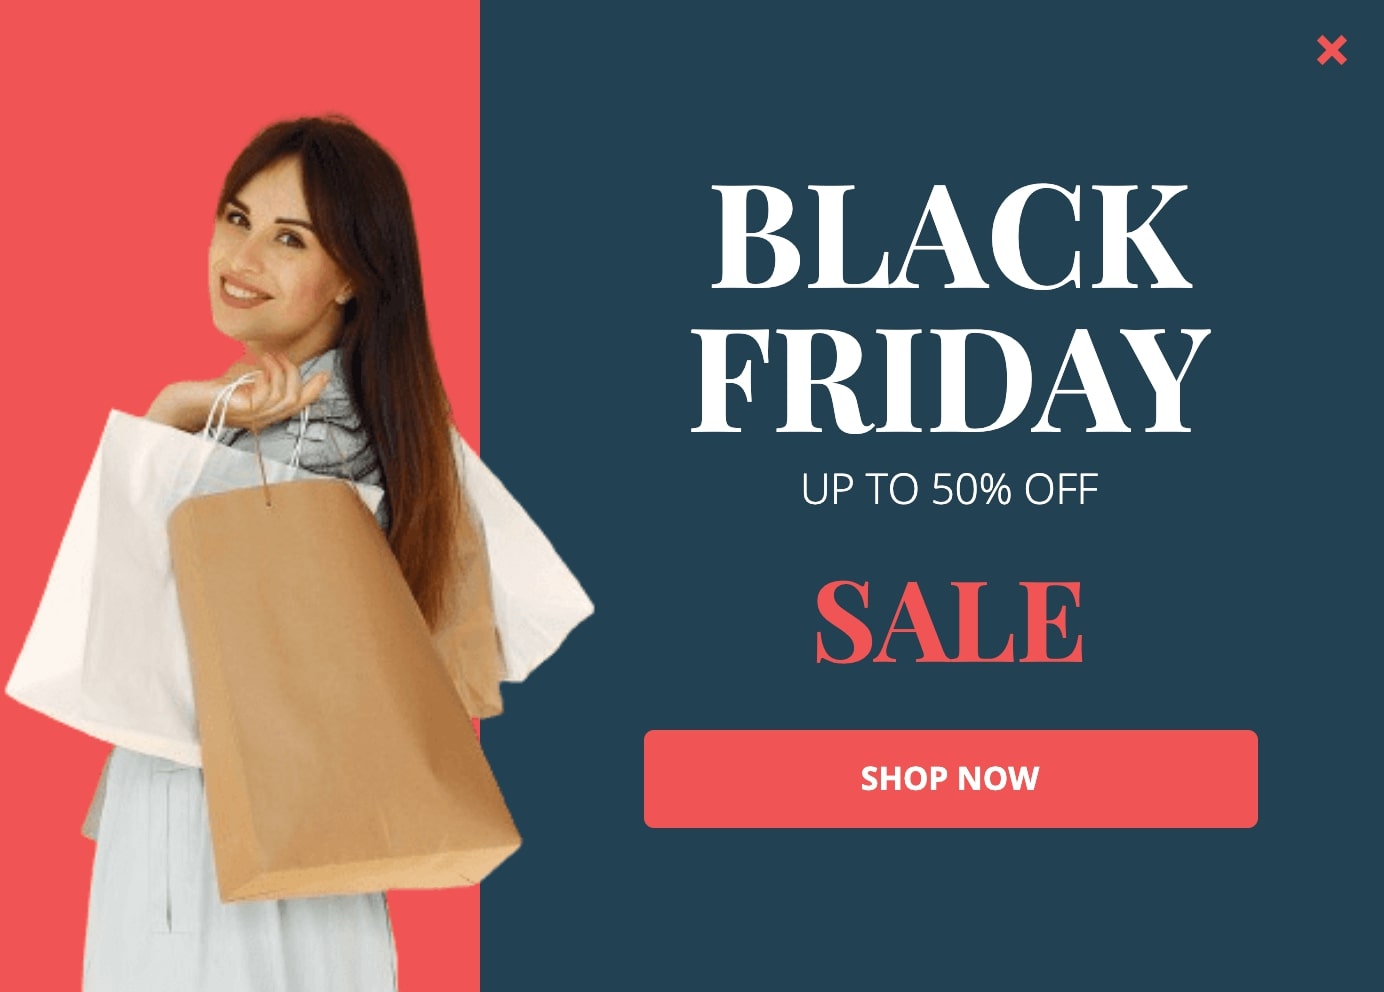 Black Friday example popup